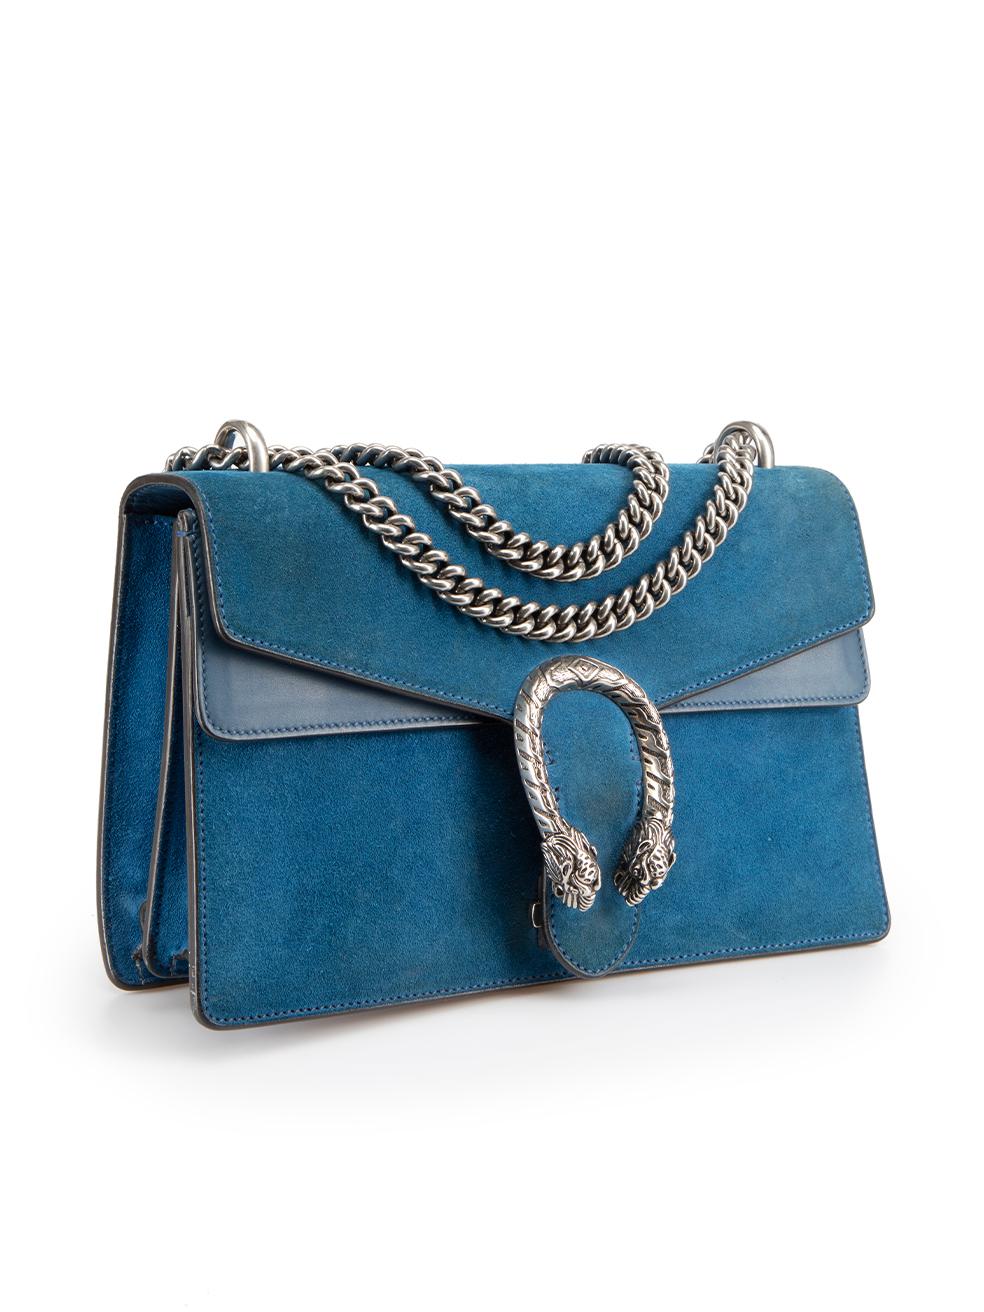 CONDITION is Very good. Minimal wear to bag is evident. Minimal wear to the centre-front around the hardware and base with discolouration. The rear also has scuff marks on this used Gucci designer resale item.



Details


Blue

Suede

Medium